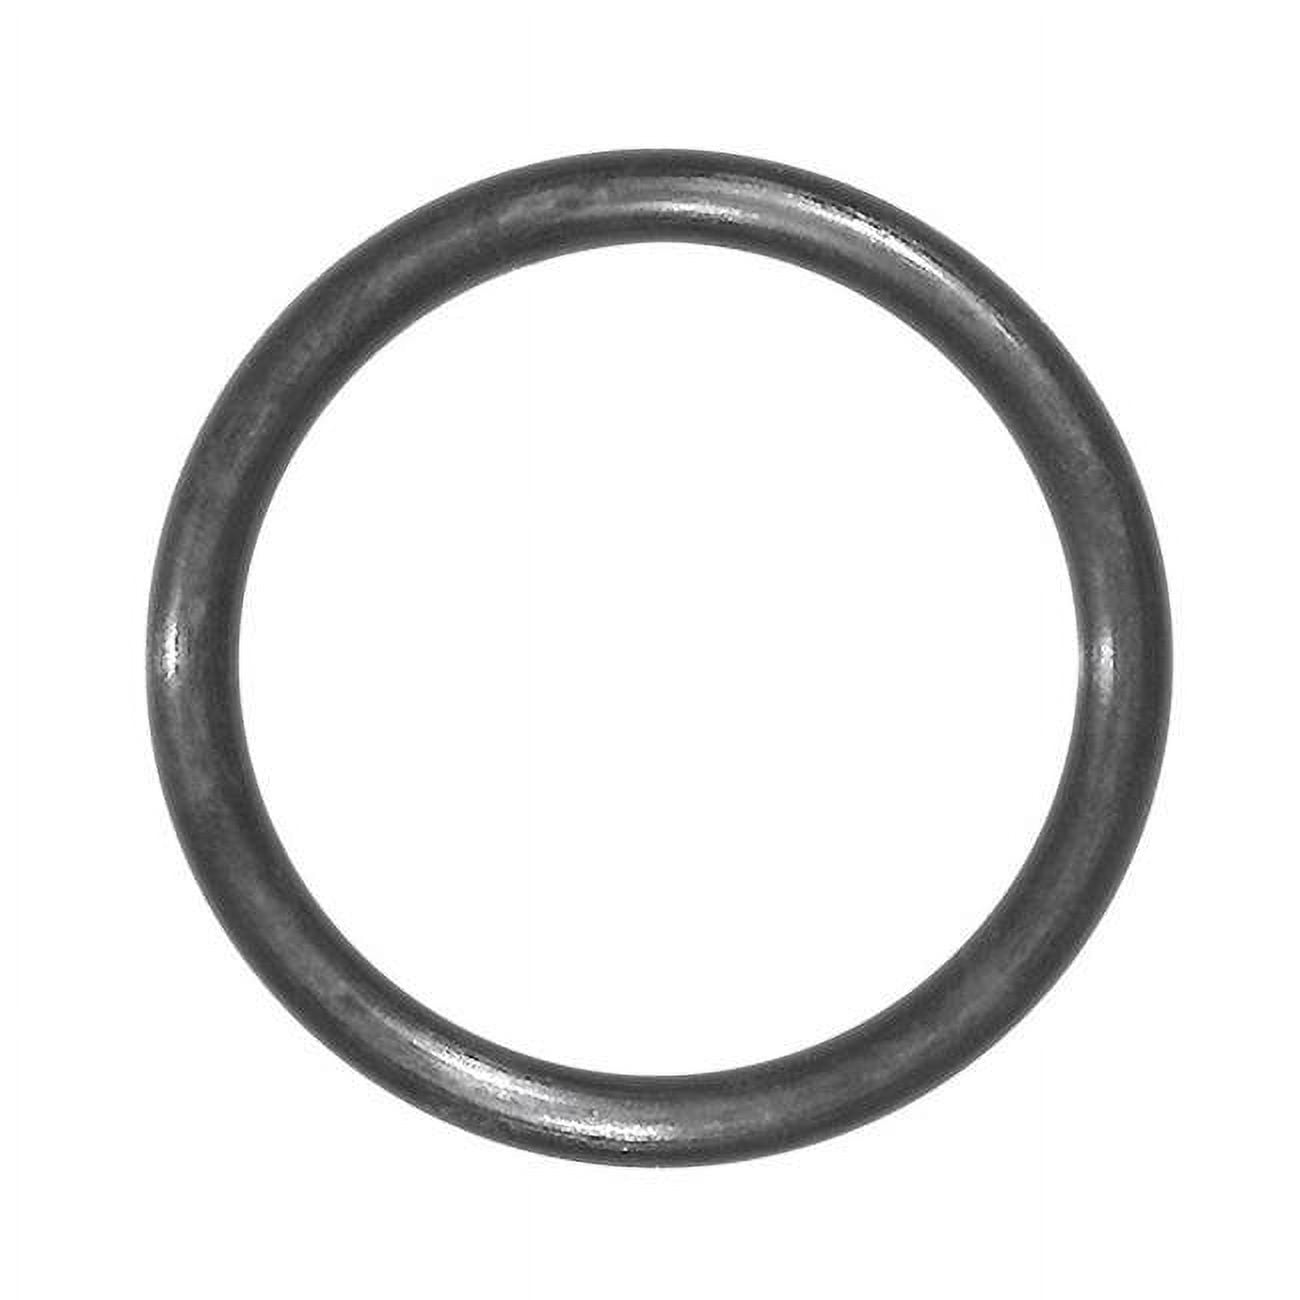 35757b 1.37 X 1.12 X 0.12 In. O Ring- Pack Of 5